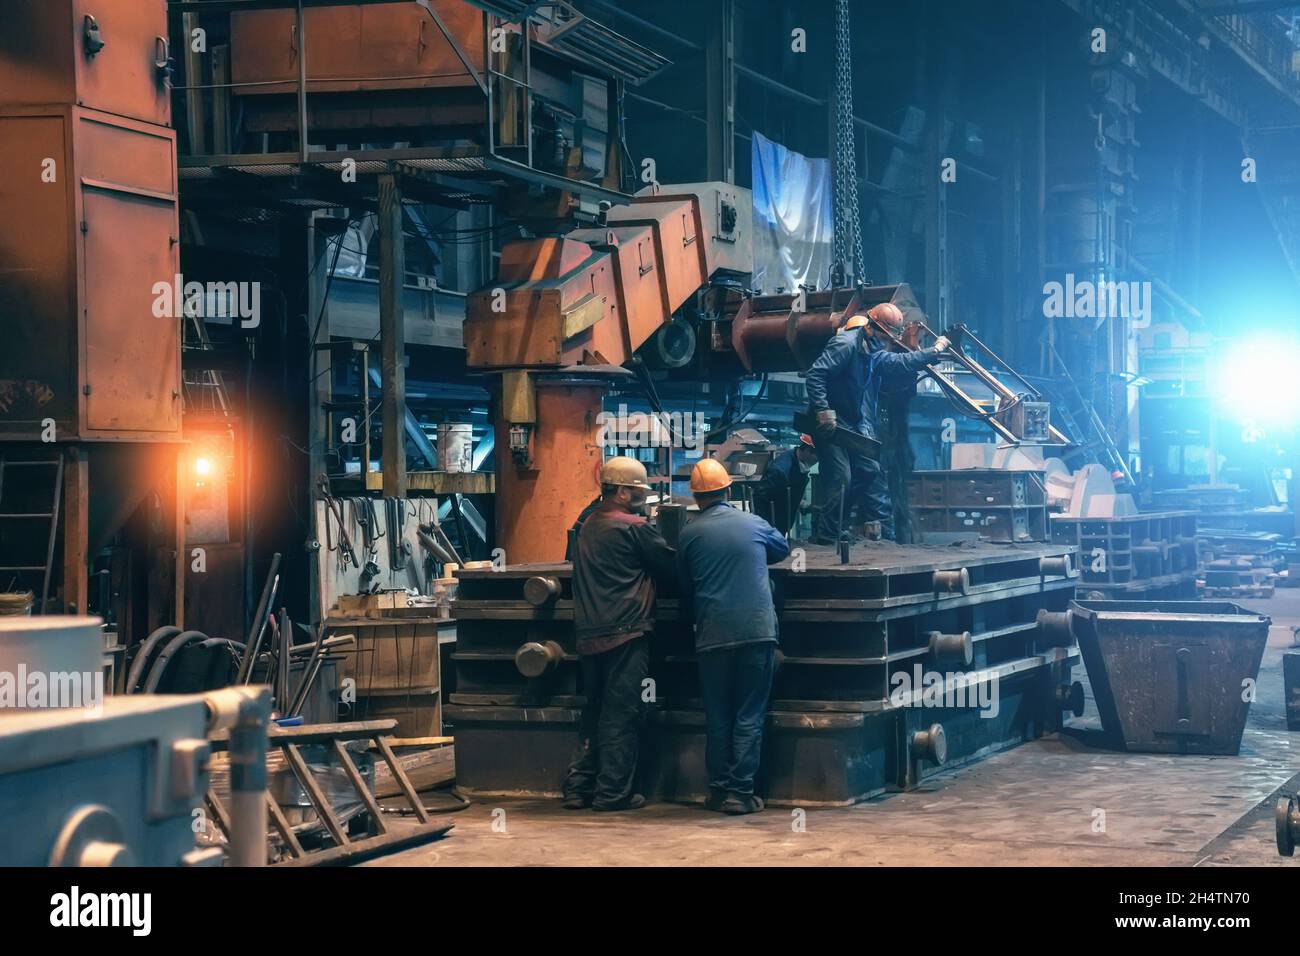 Steel mill interior inside. Workers in workshop of metallurgical plant. Foundry and heavy industry building inside background. Stock Photo